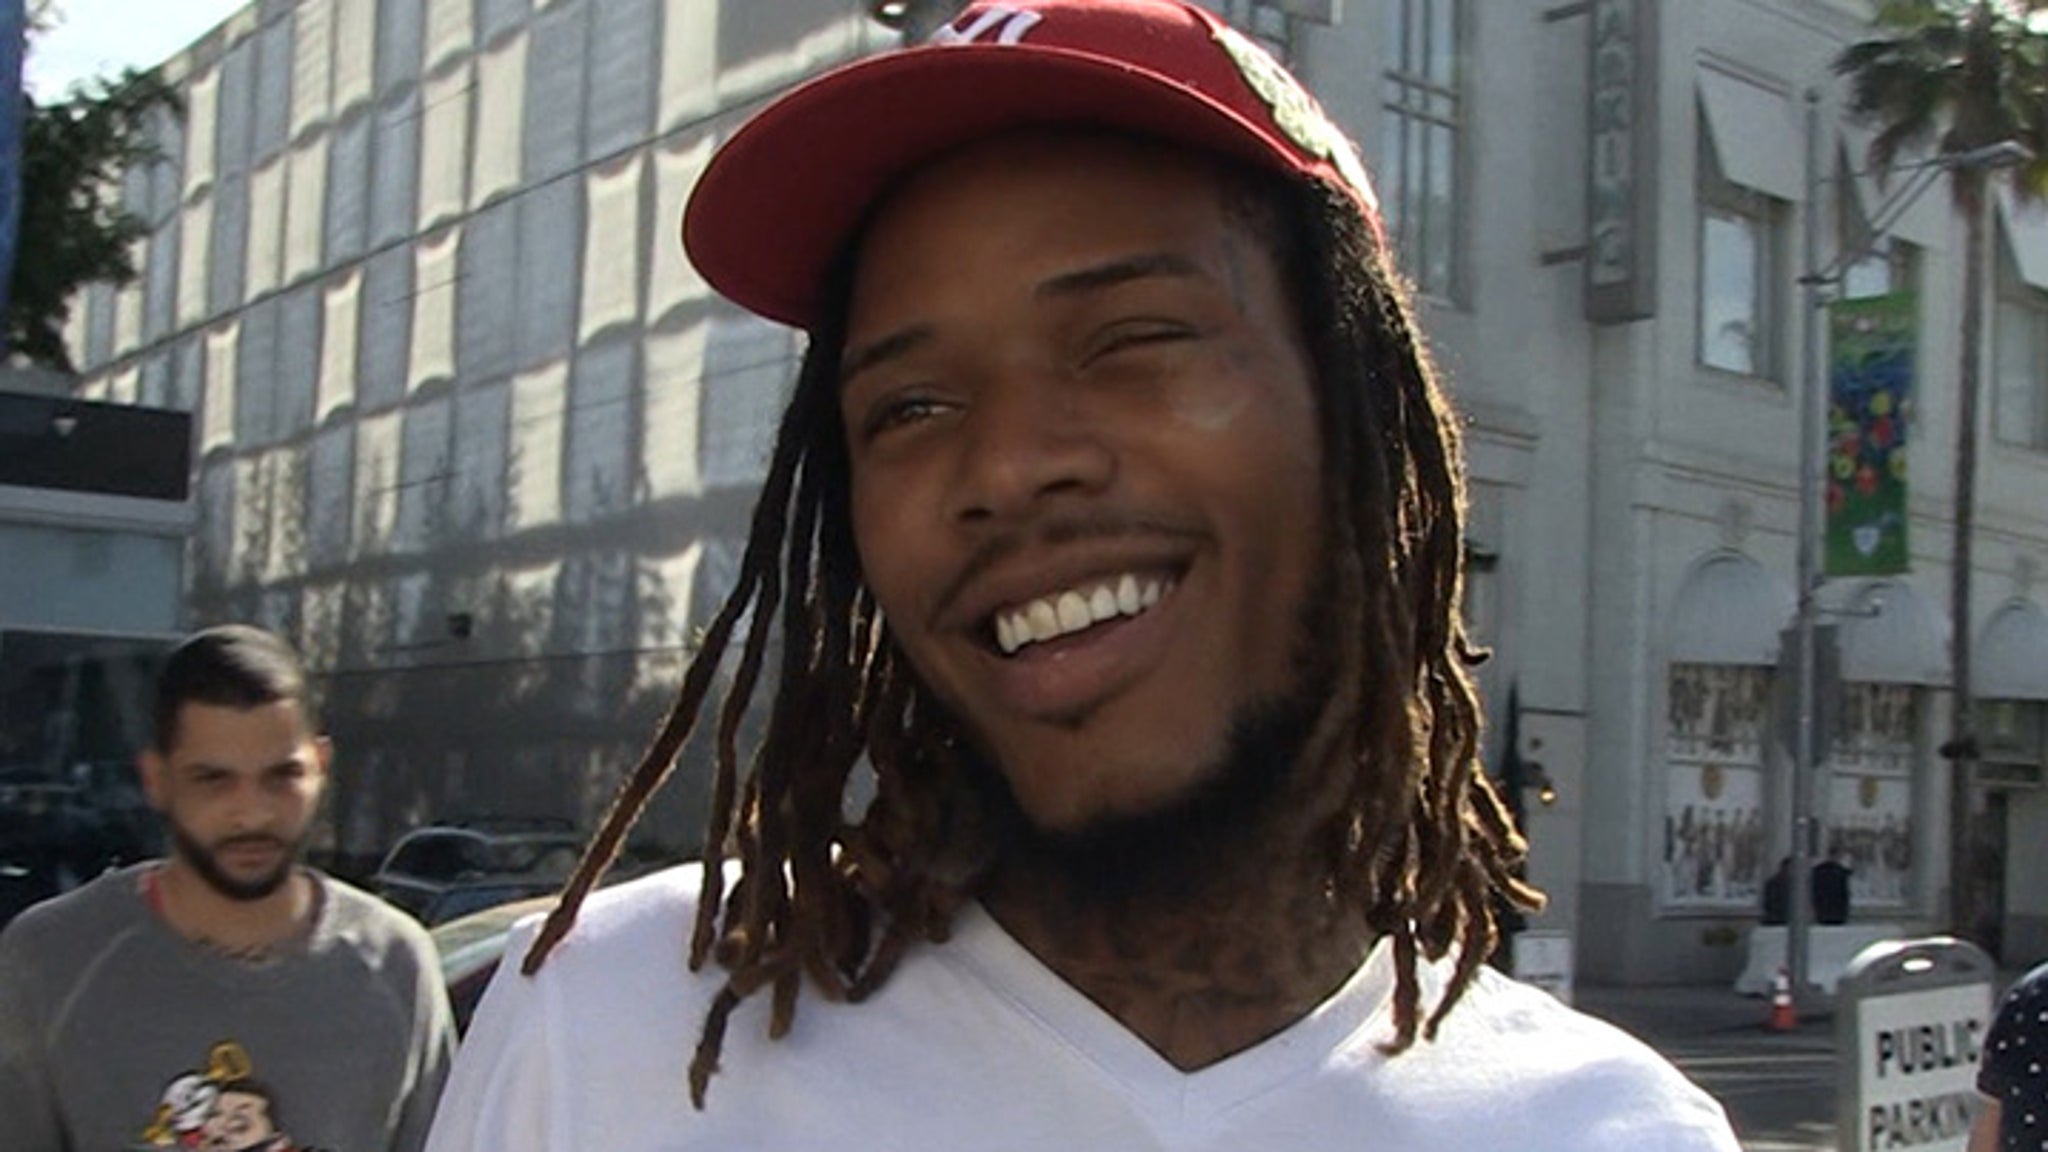 Fetty Wap Down for Working with Tekashi 6ix9ine Again, Bullets or Not